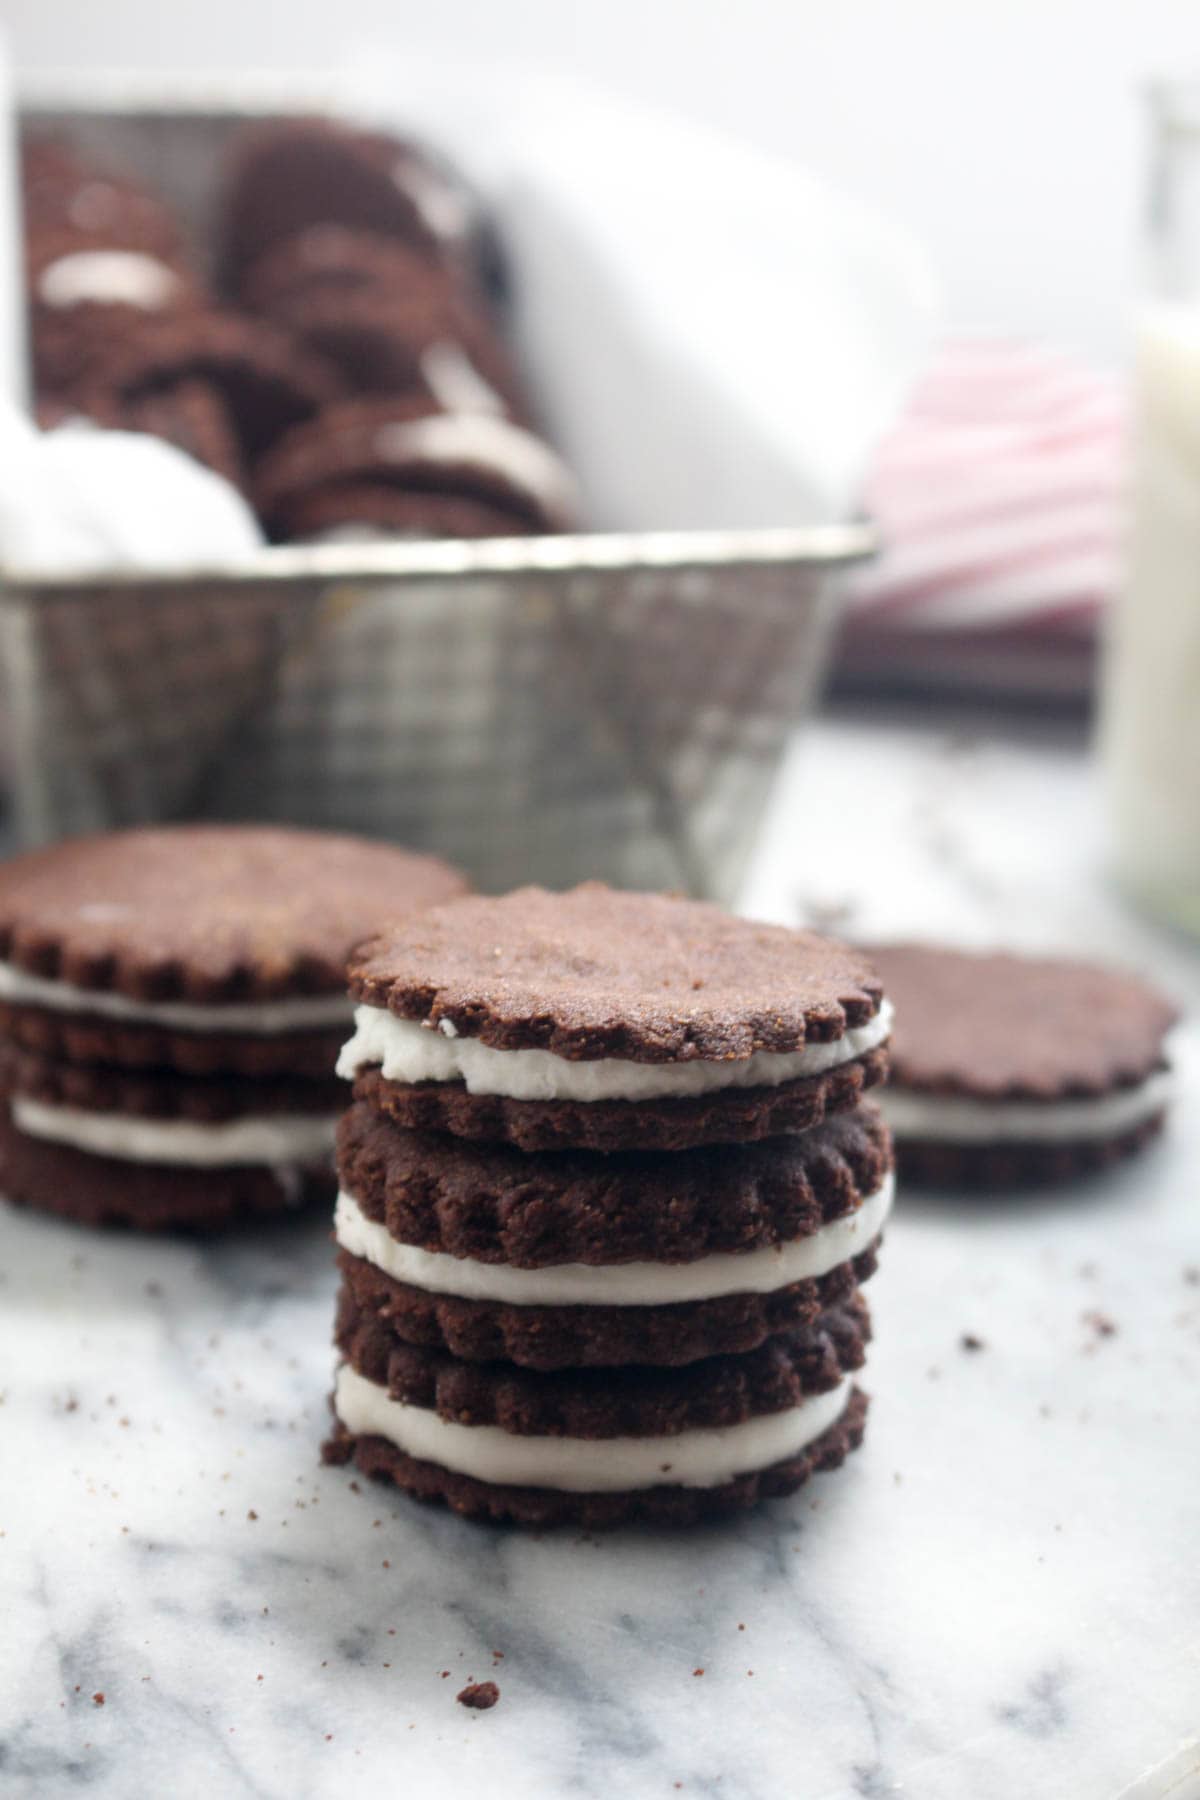 These Homemade Peppermint Oreo Cookies are a gluten free and vegan recipe that will knock everyone's socks off! A perfect Christmas dessert with crisp chocolate wafer cookies, and dense soft peppermint infused filling. Perfect for dunking in milk. | CatchingSeeds.com 